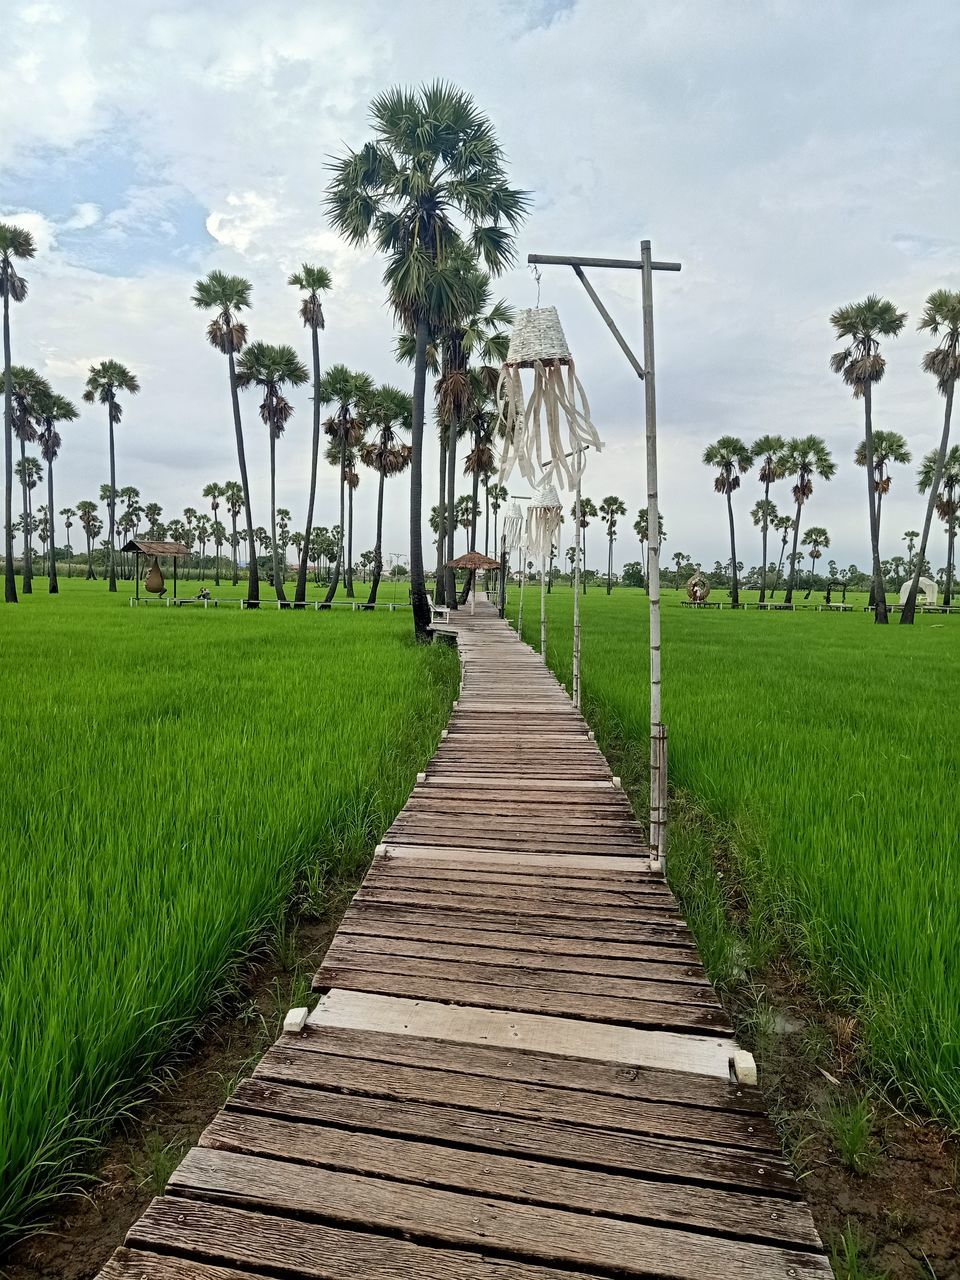 walkway, plant, tropical climate, palm tree, sky, tree, cloud, nature, grass, land, footpath, boardwalk, environment, the way forward, landscape, green, agriculture, architecture, field, beauty in nature, travel destinations, water, rural area, outdoors, no people, coconut palm tree, tranquility, diminishing perspective, scenics - nature, tropical tree, travel, day, rural scene, wood, built structure, paddy field, environmental conservation, trip, vacation, tourism, holiday, tranquil scene, beach